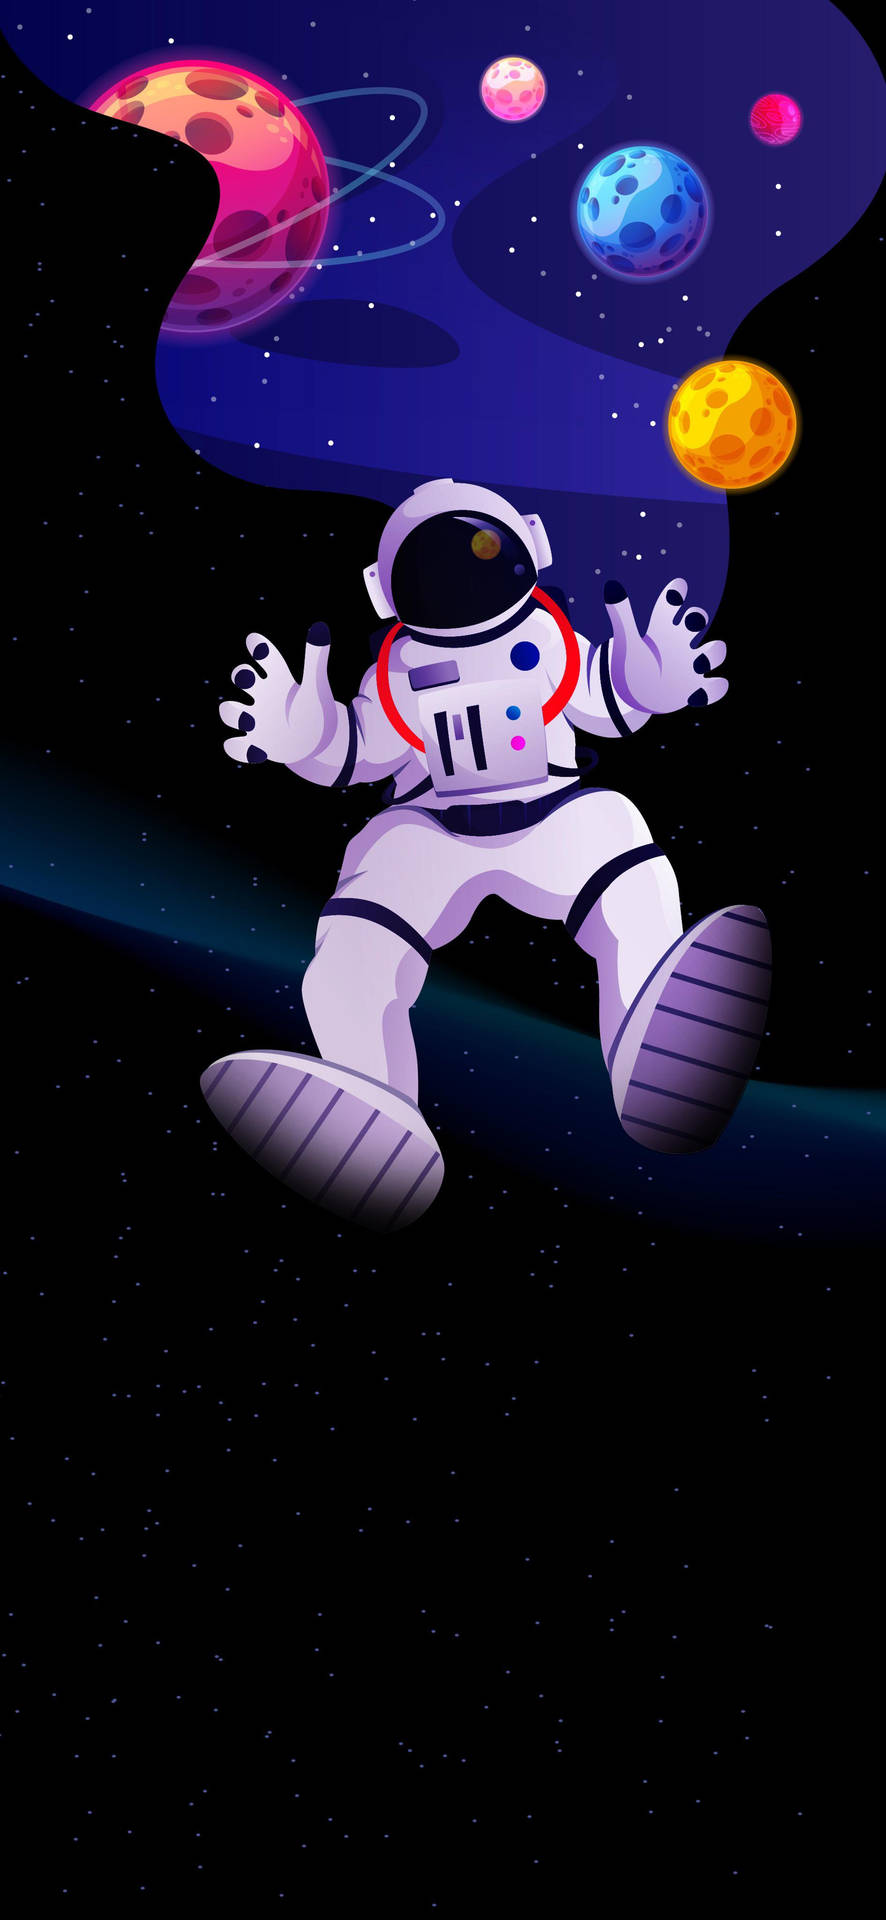 Floating Astronaut In Space Universal Wallpaper